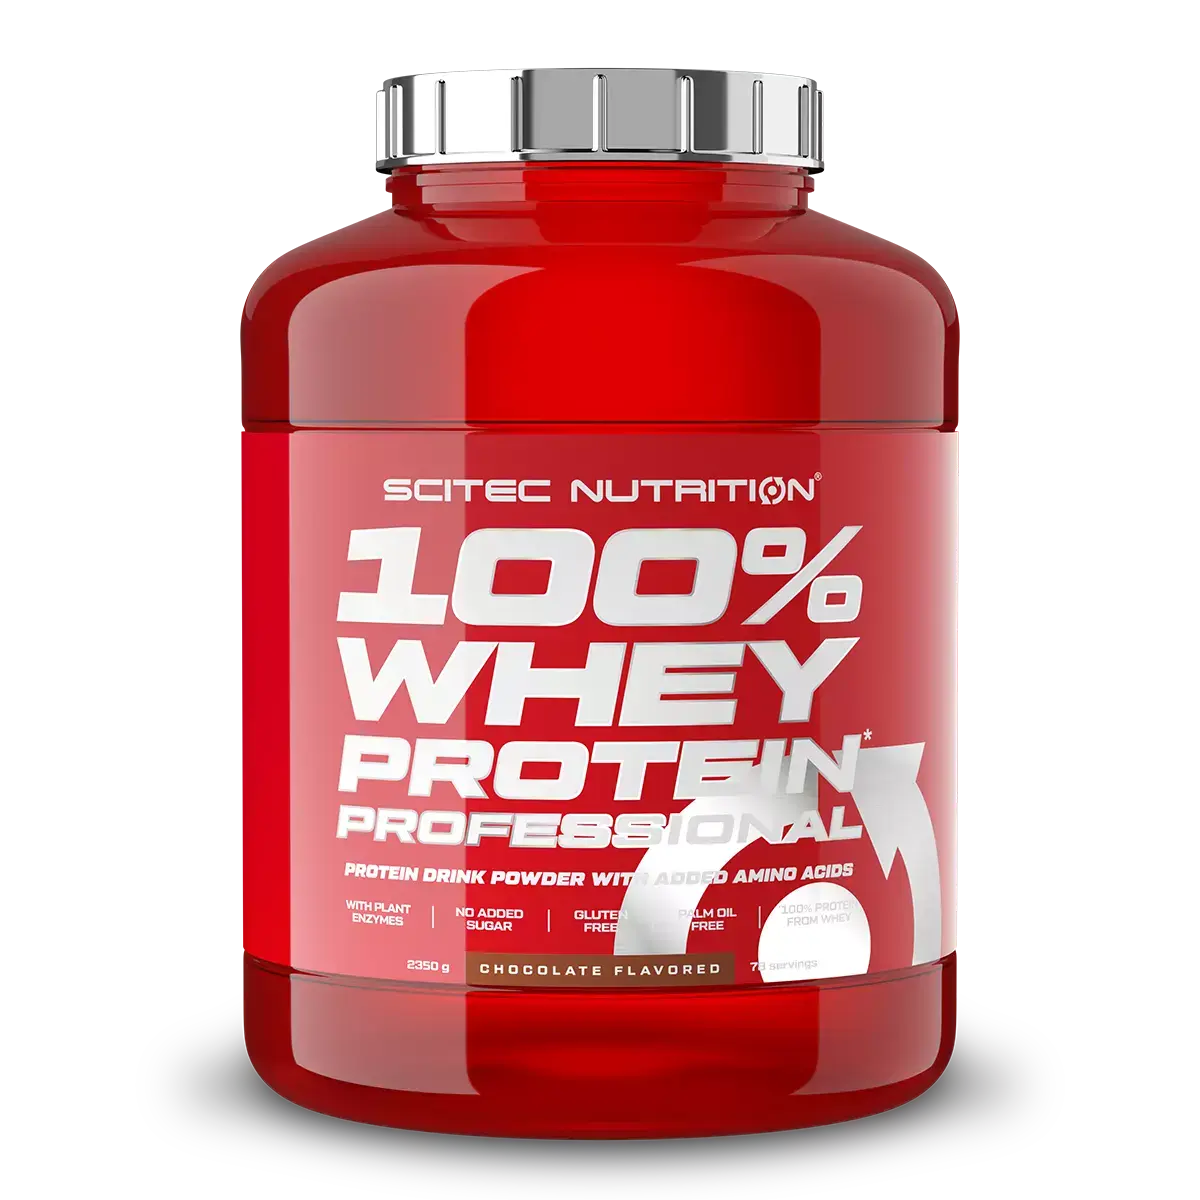 SCITEC NUTRITION - Whey Protein Professional